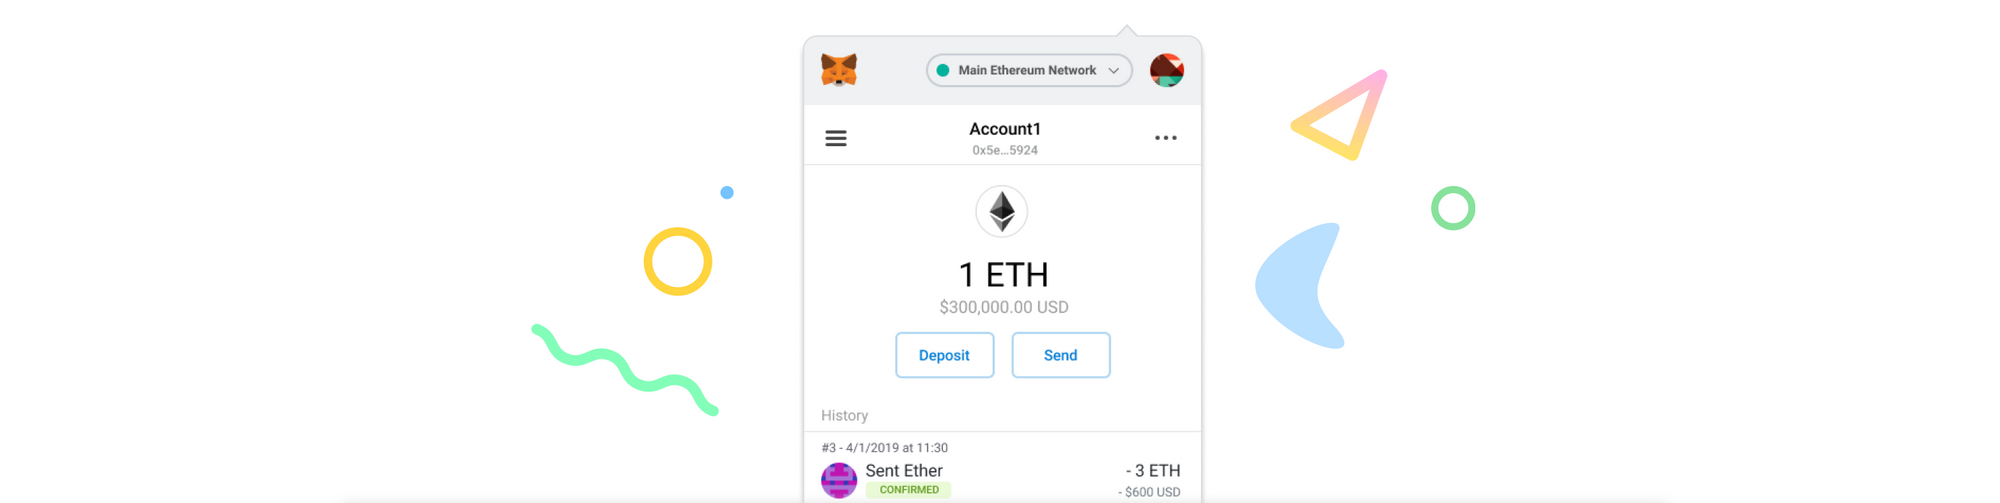 MetaMask wallet for your browser